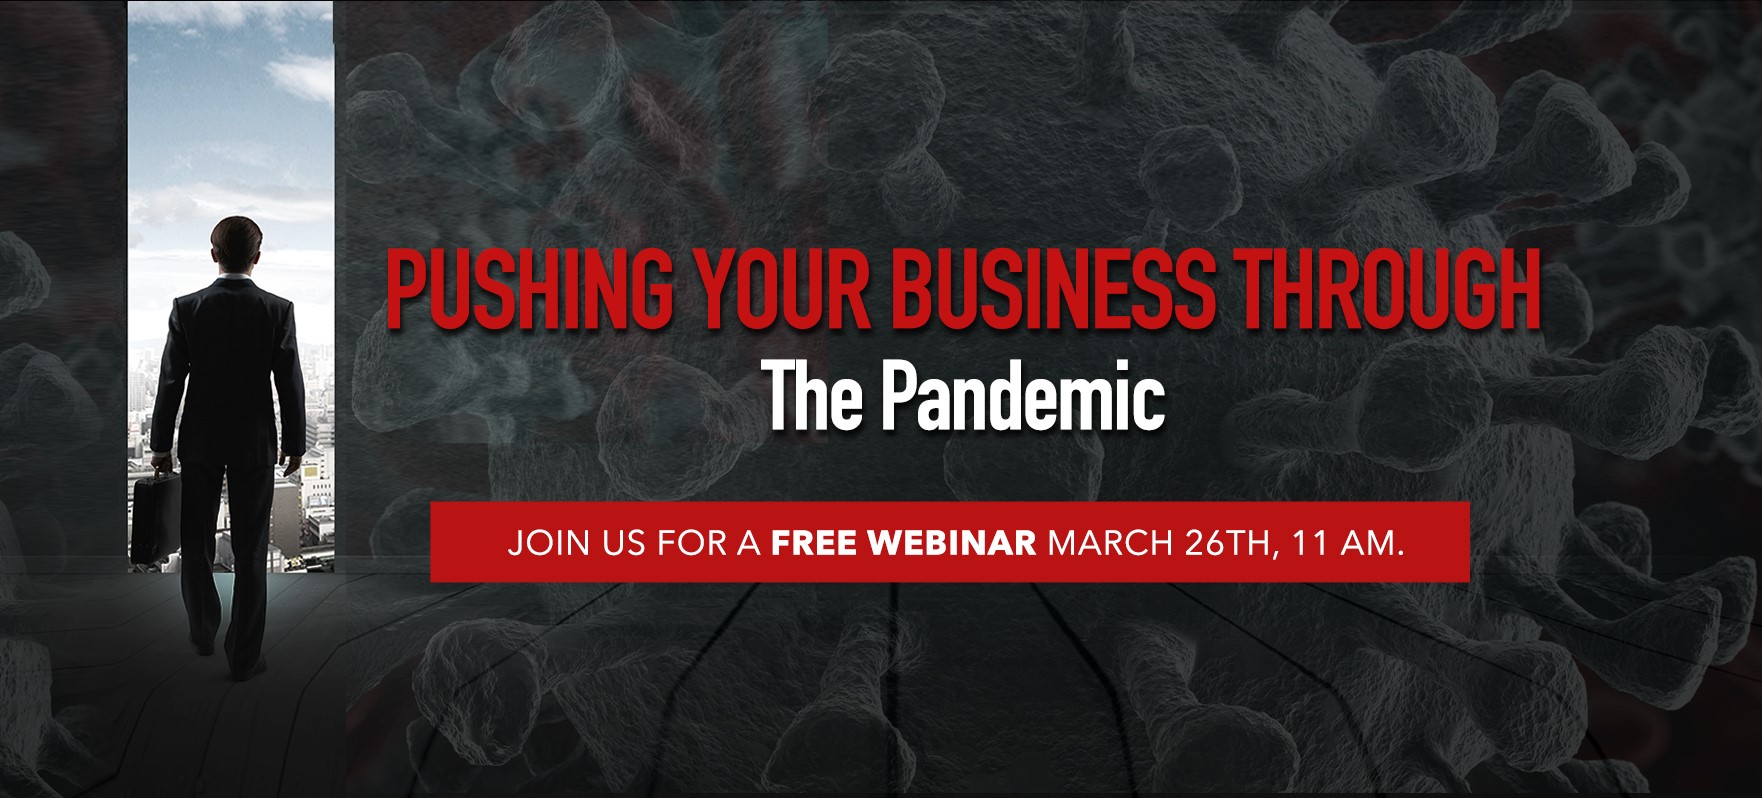 Webinar - Pushing Your Business Through the Pandemic graphic only